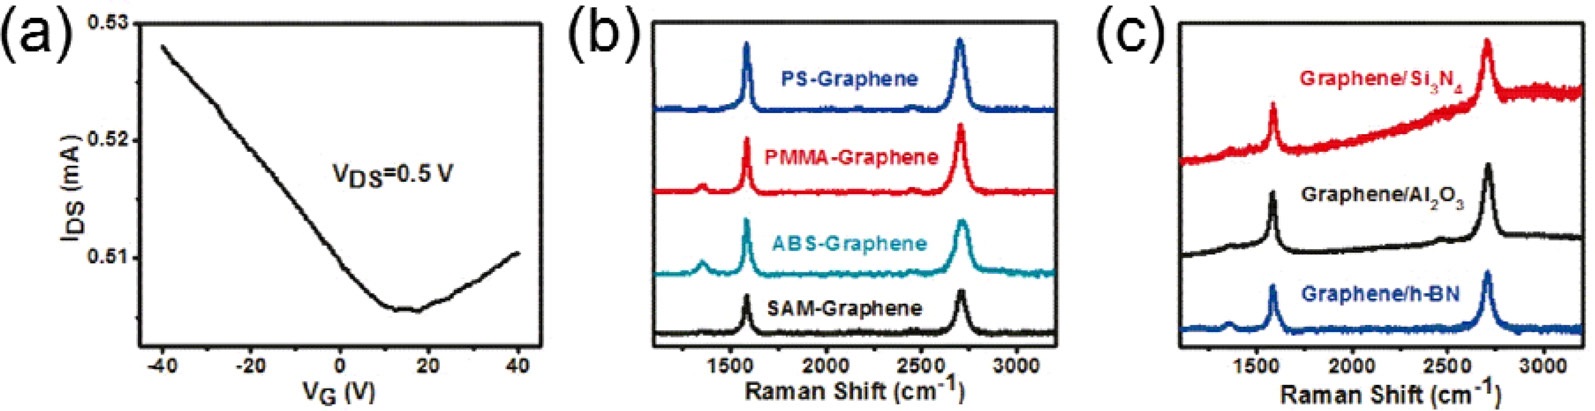 (a) IDS-VG curve for a PPMS-derived, graphene-based, back-gated field-effect transistor device (room temperature); (b) Raman spectra of graphene converted from polymers (PS, PMMA, ABS) and an self-assembled monolayer (SAM) prepared from butyltriethoxysilane; (c) Raman spectra of graphene derived from PPMS on h-BN, Si3N4, and Al2O3 (sapphire) [38] (Reprinted with permission. Copyright 2011, American Chemical Society). PS: polystyrene, PMMA: poly(methyl methacrylate), ABS: poly(acrylonitrile-co-butadiene-co-styrene), PPMS: poly(2-phenylpropyl)methylsiloxane.